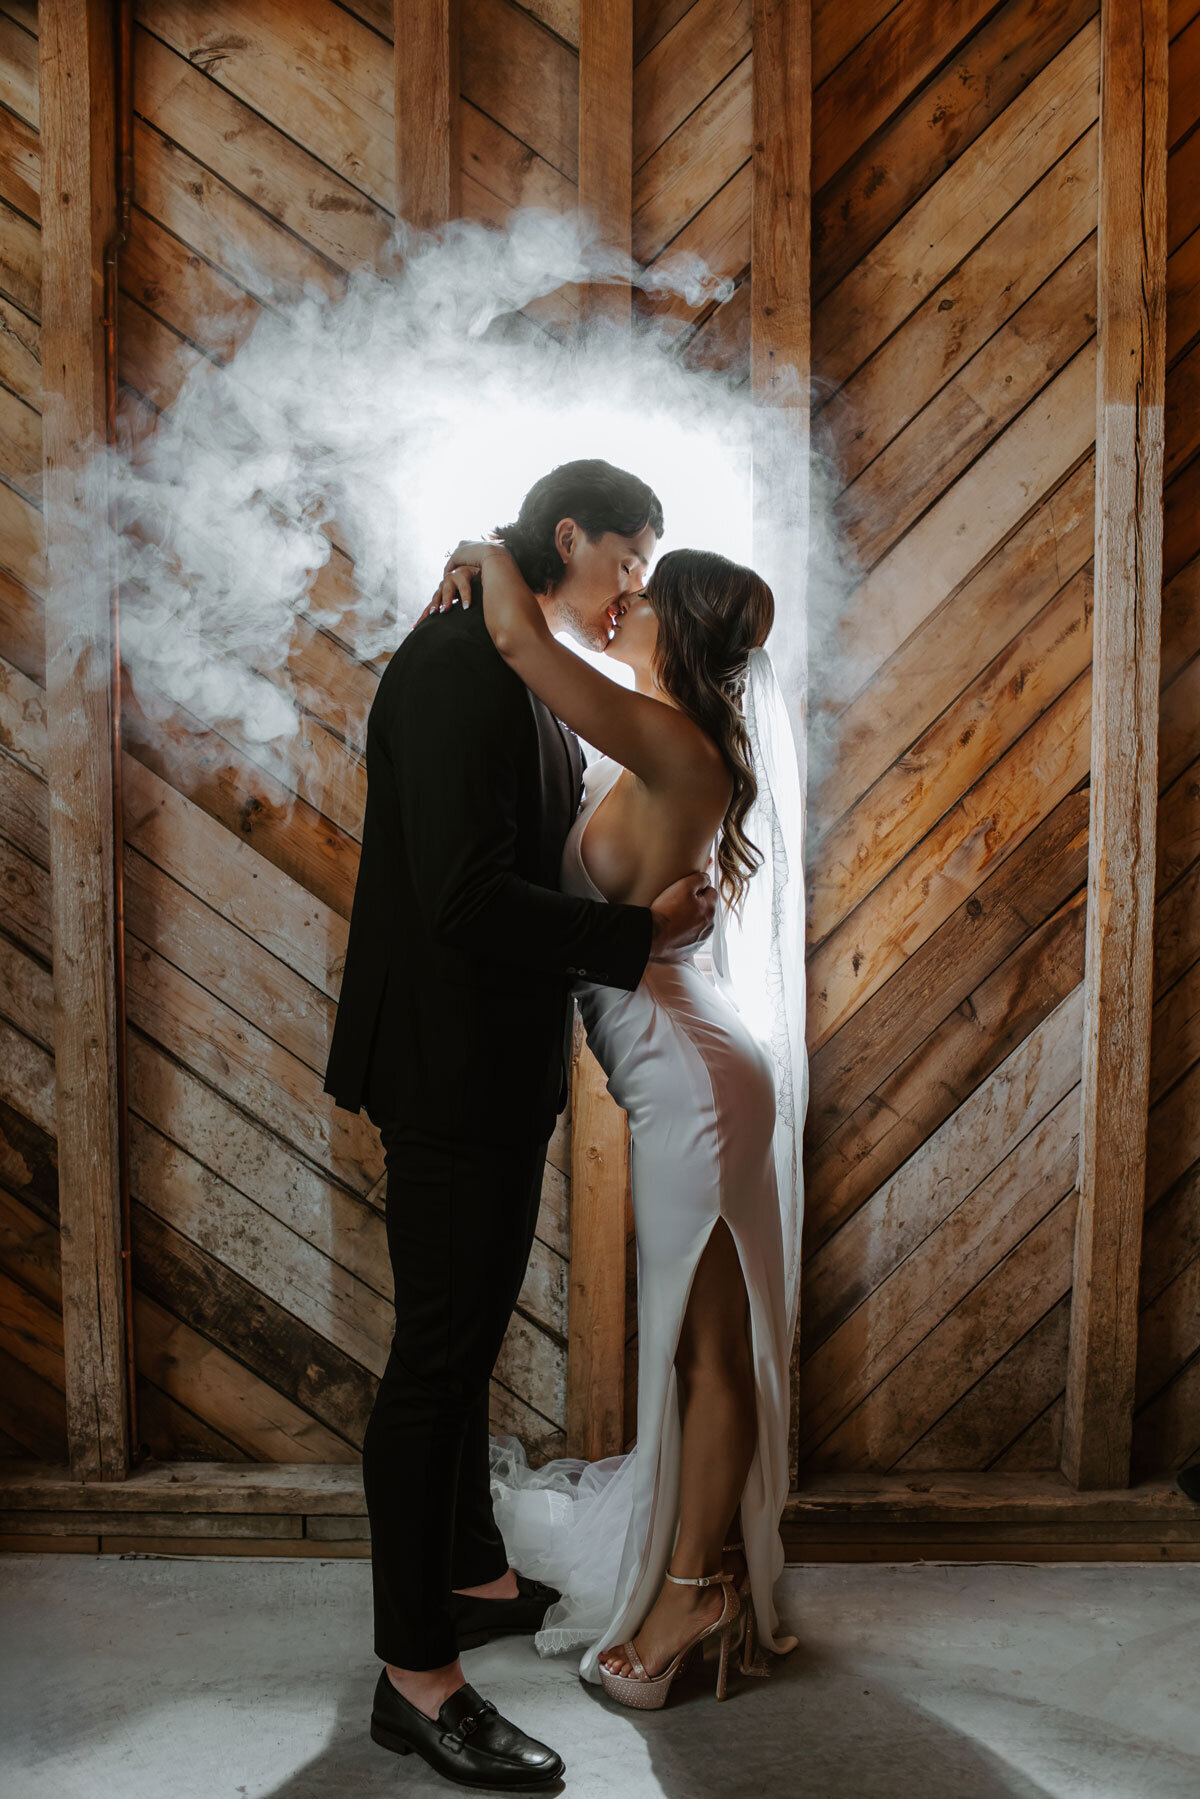 Bride and groom kissing with fog in the background.